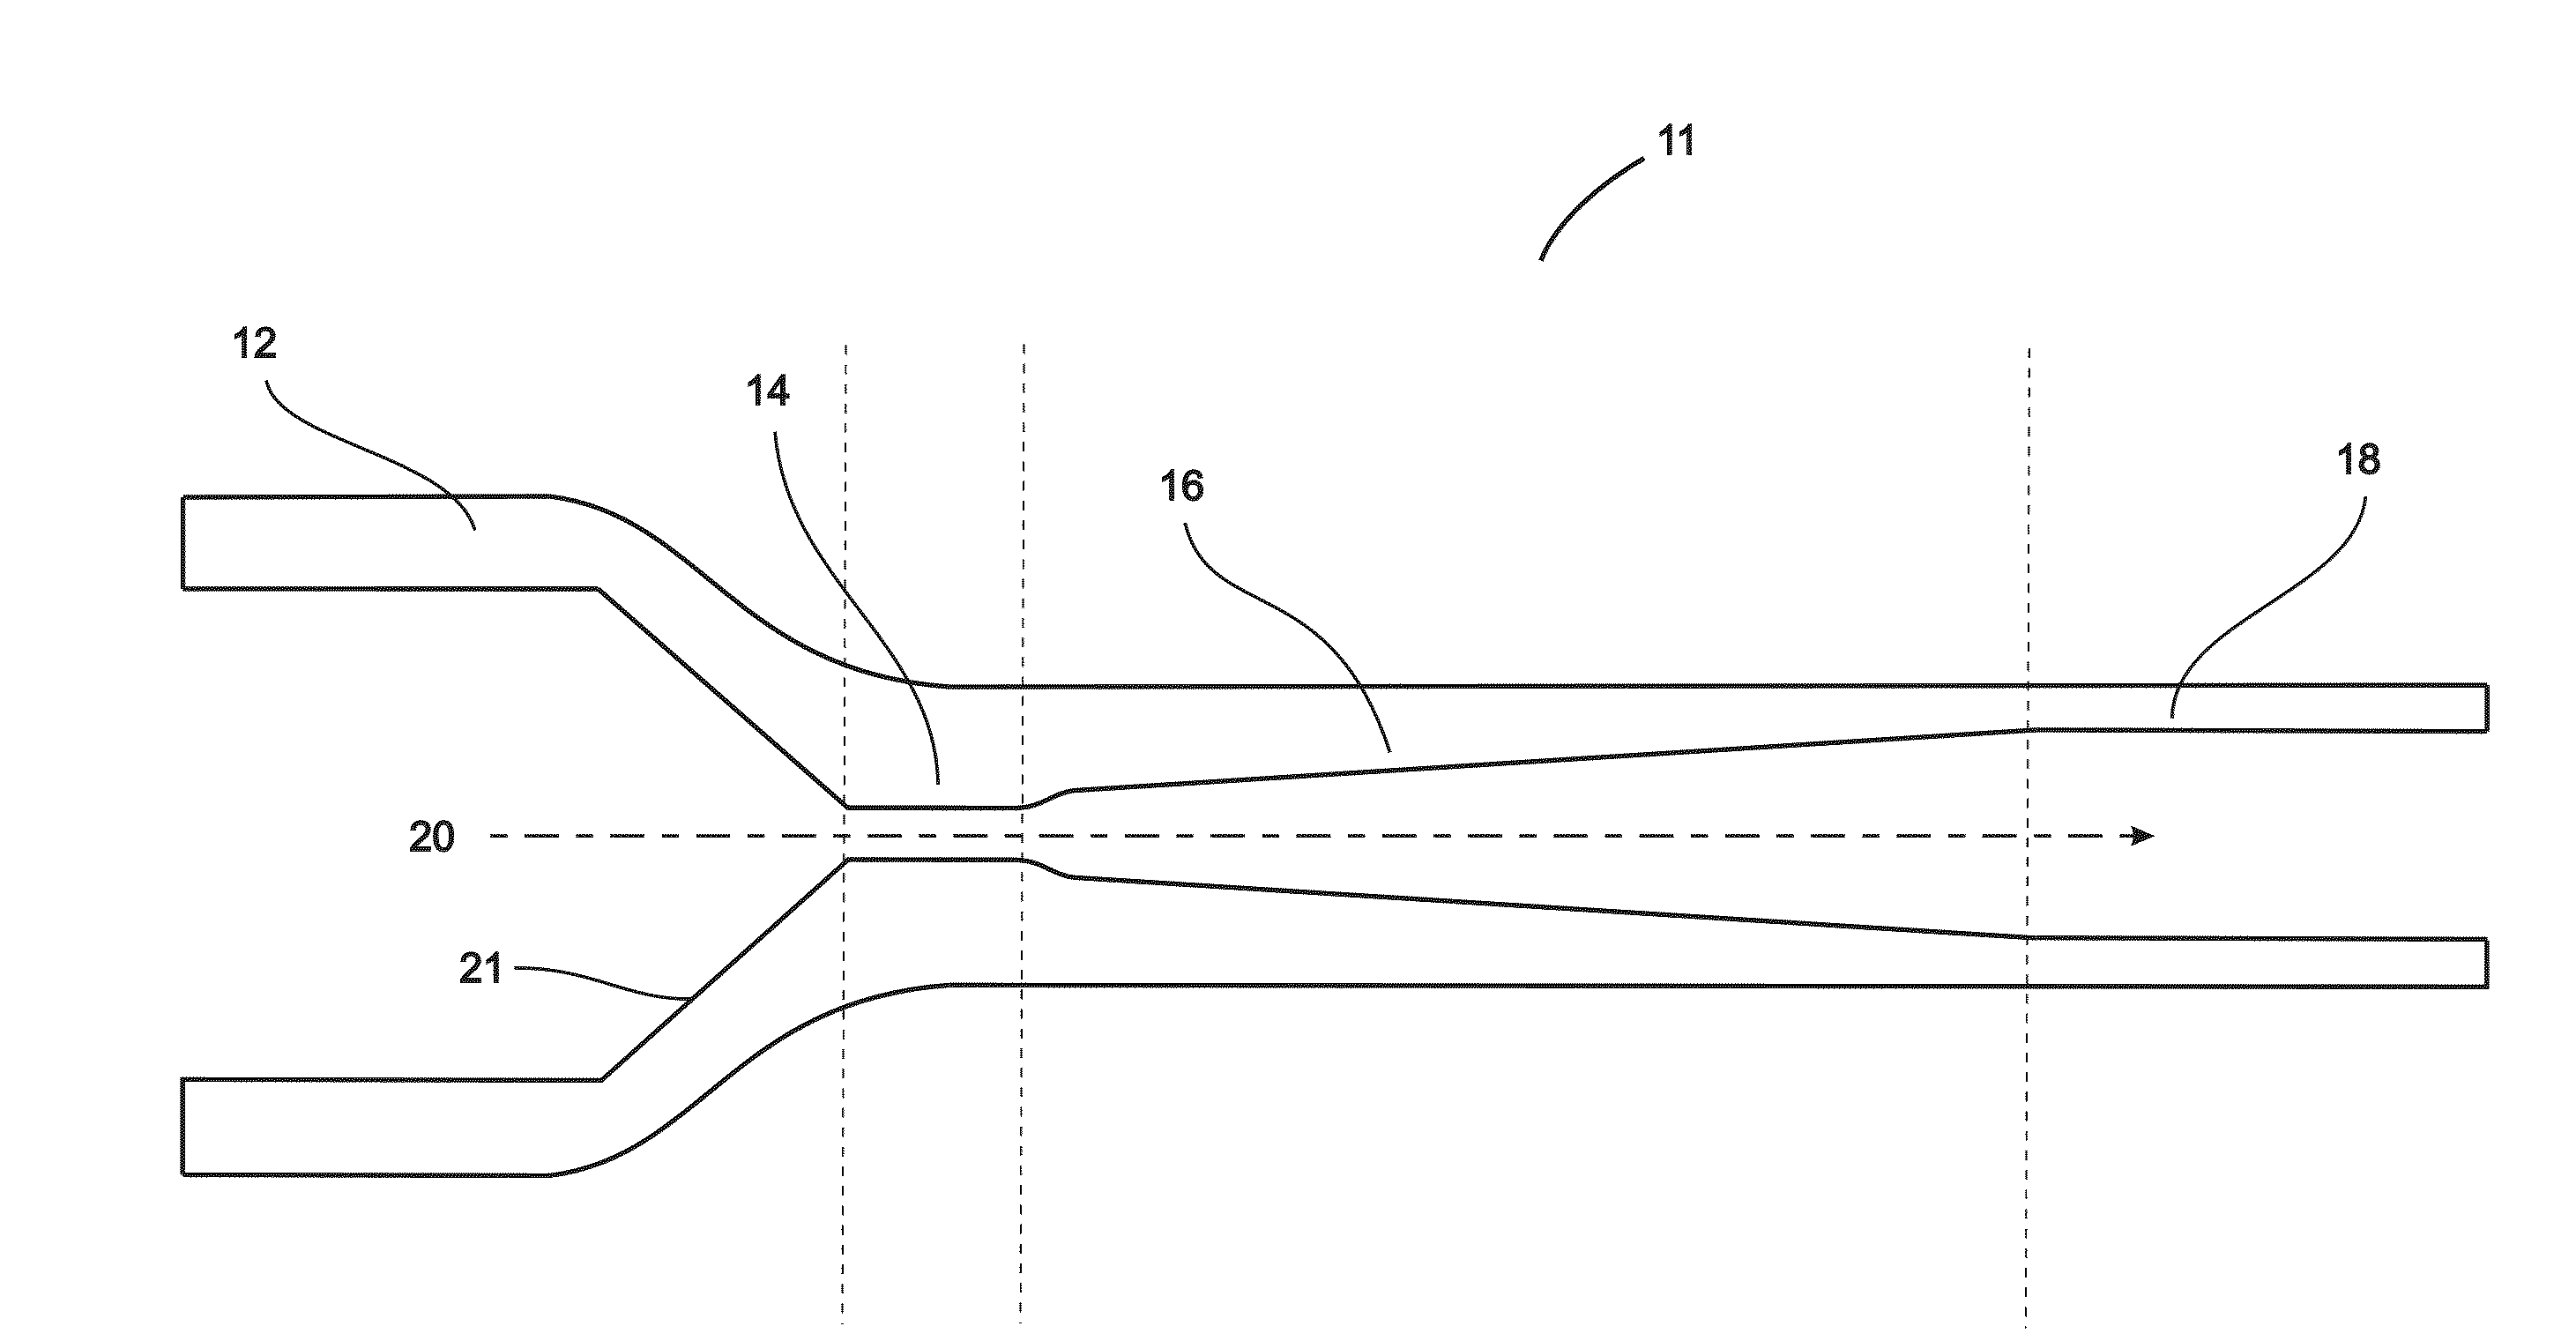 System and method for heat transfer